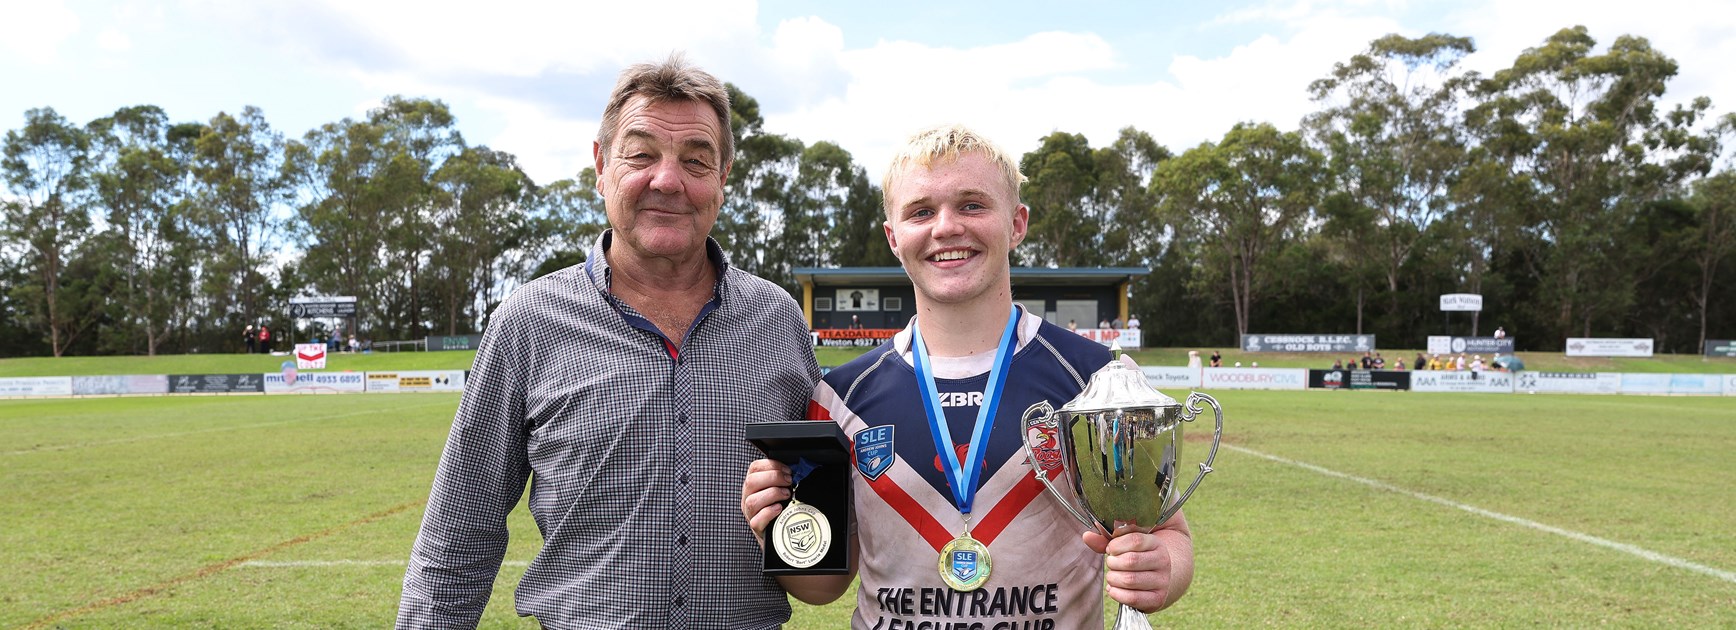 Bert Lowrie (L) with SLE Andrew Johns Cup Player of the Match, Alexander Stephenson. Photos: Bryden Sharp